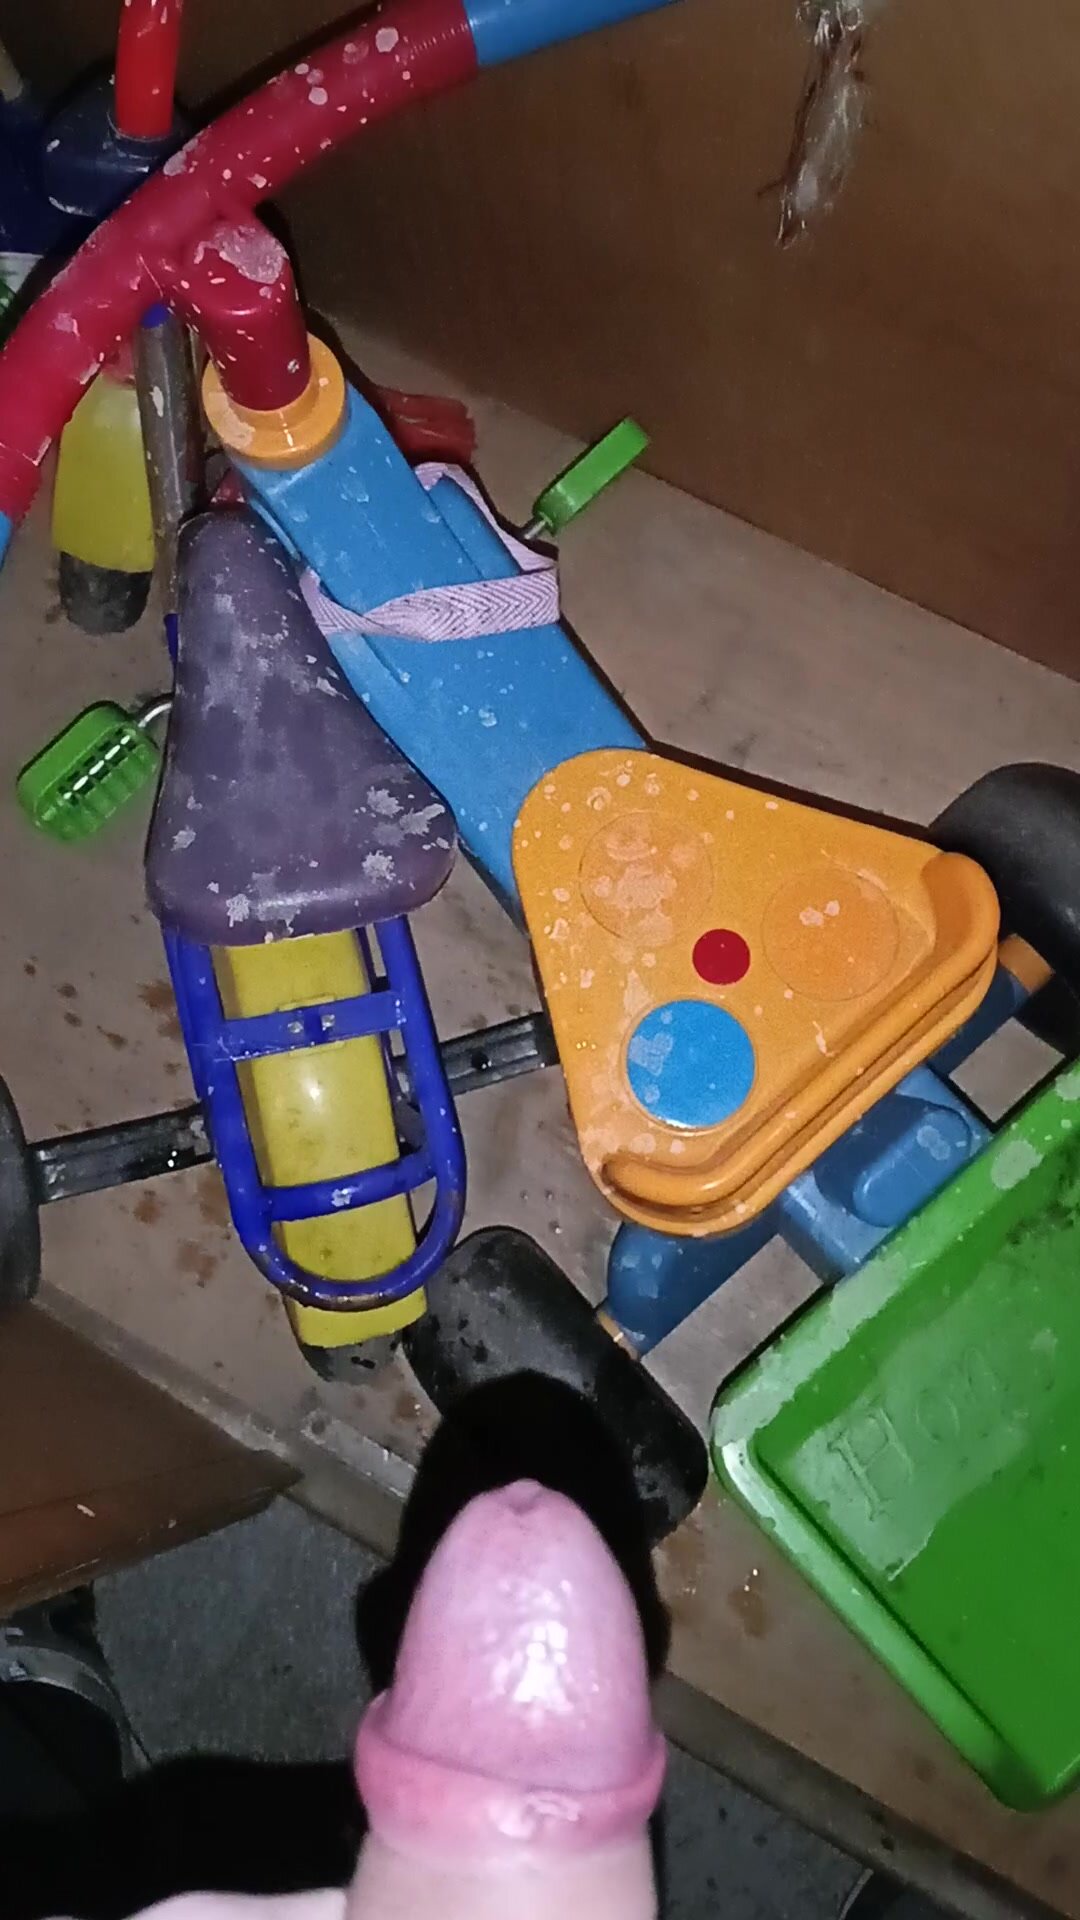 Guy pissing on someones toys in basement!